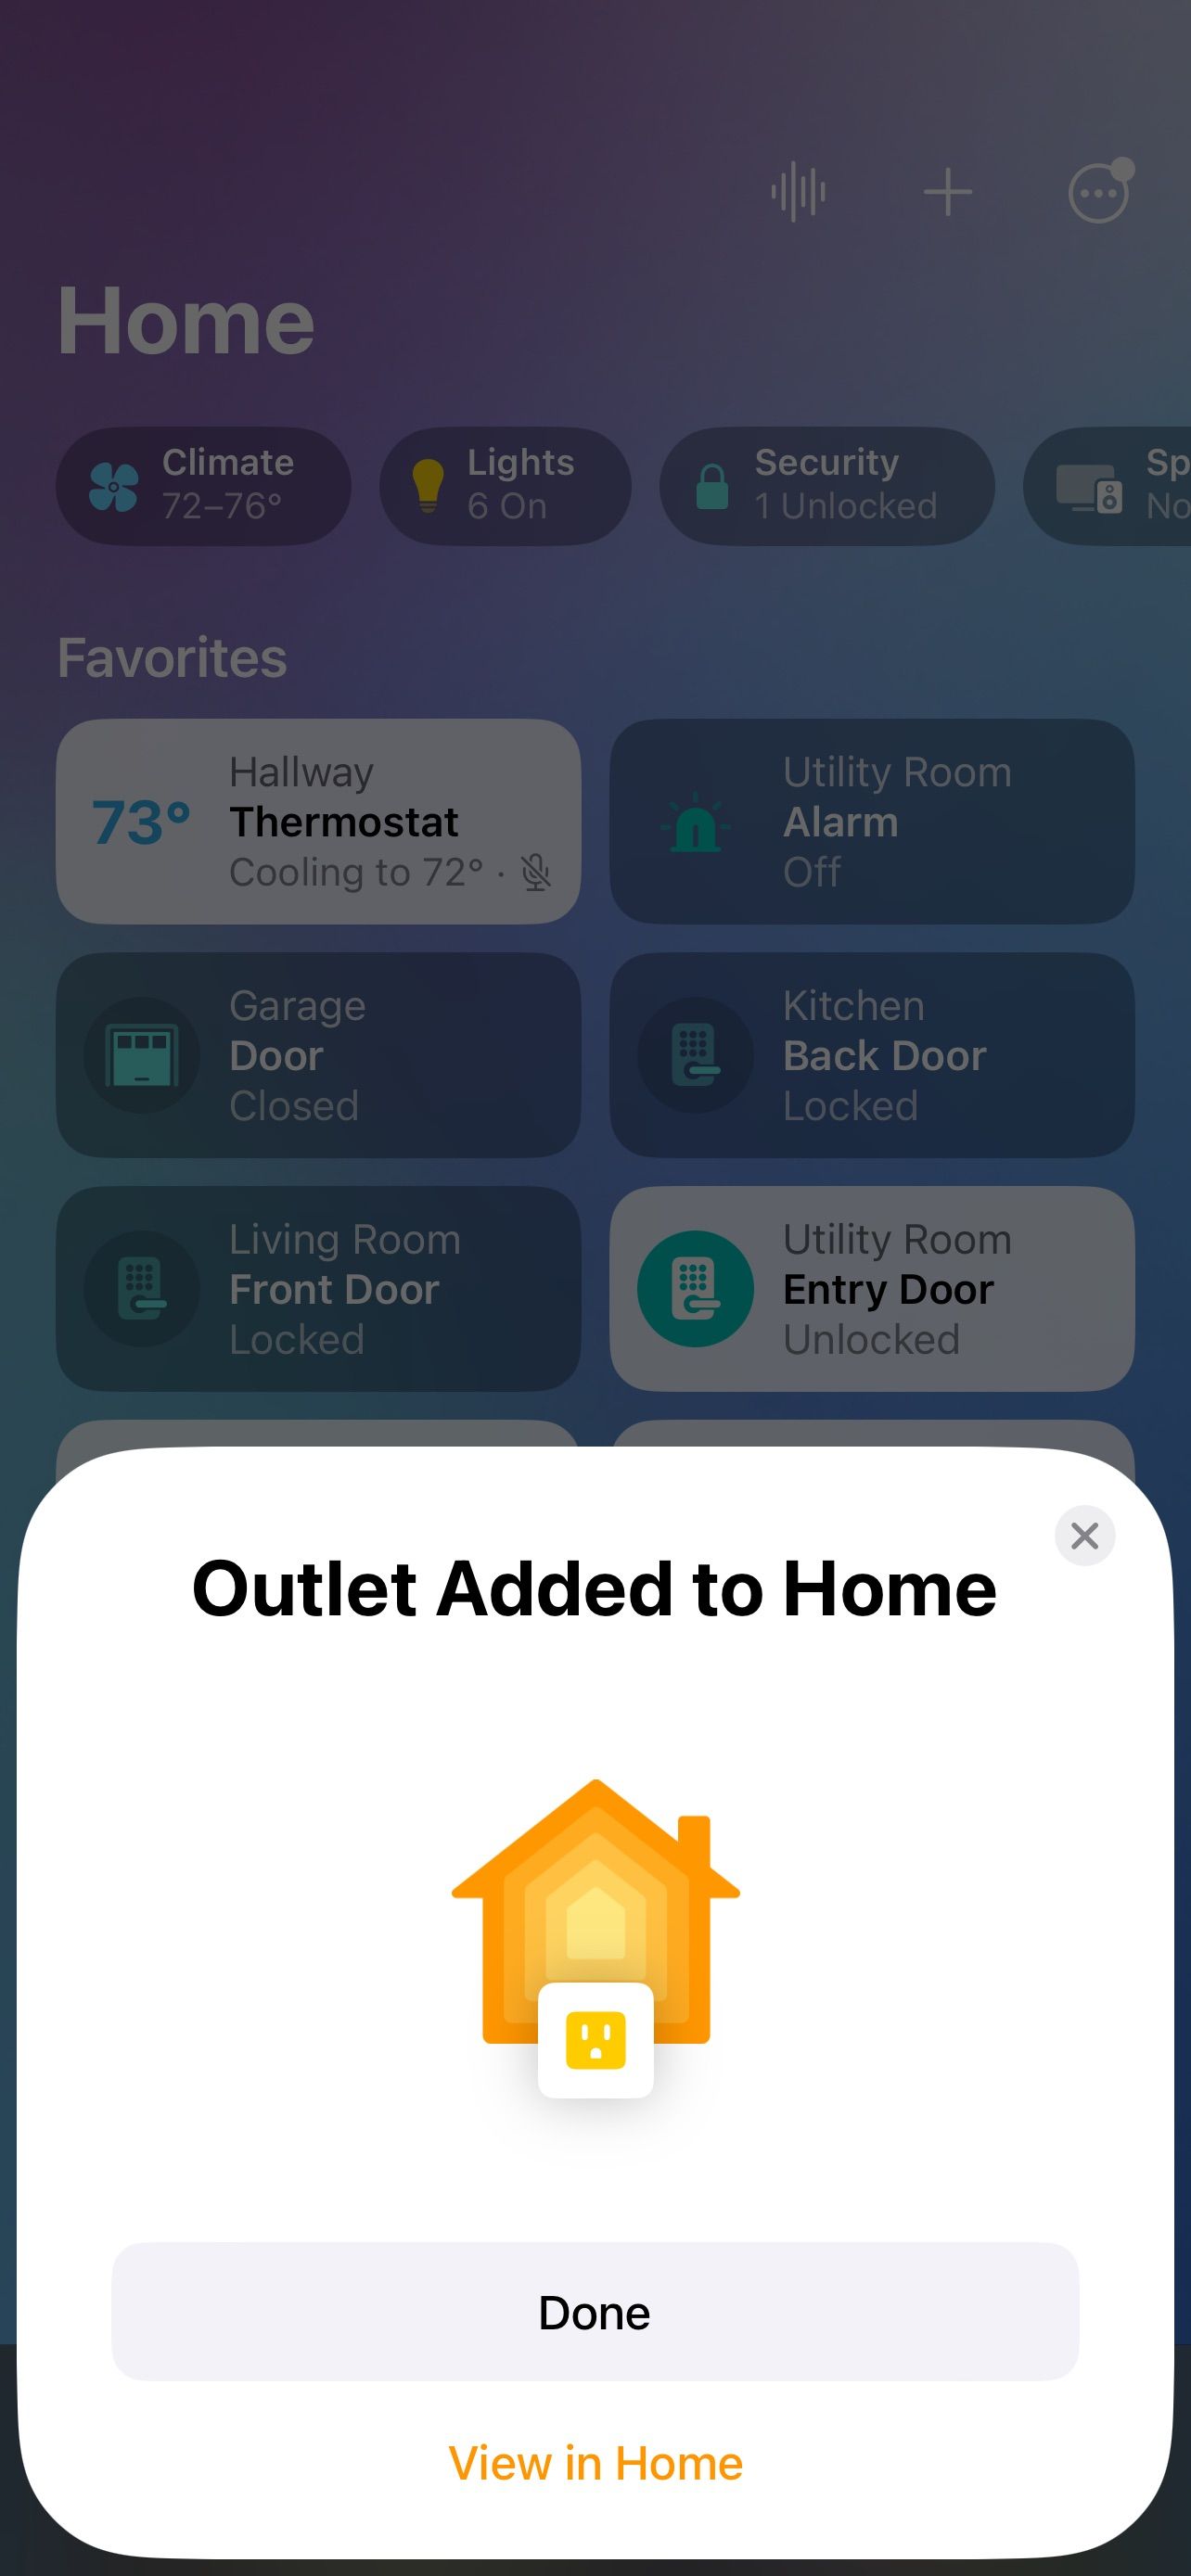 Support for Matter in iOS 15 will lead to new categories of devices for  HomeKit users